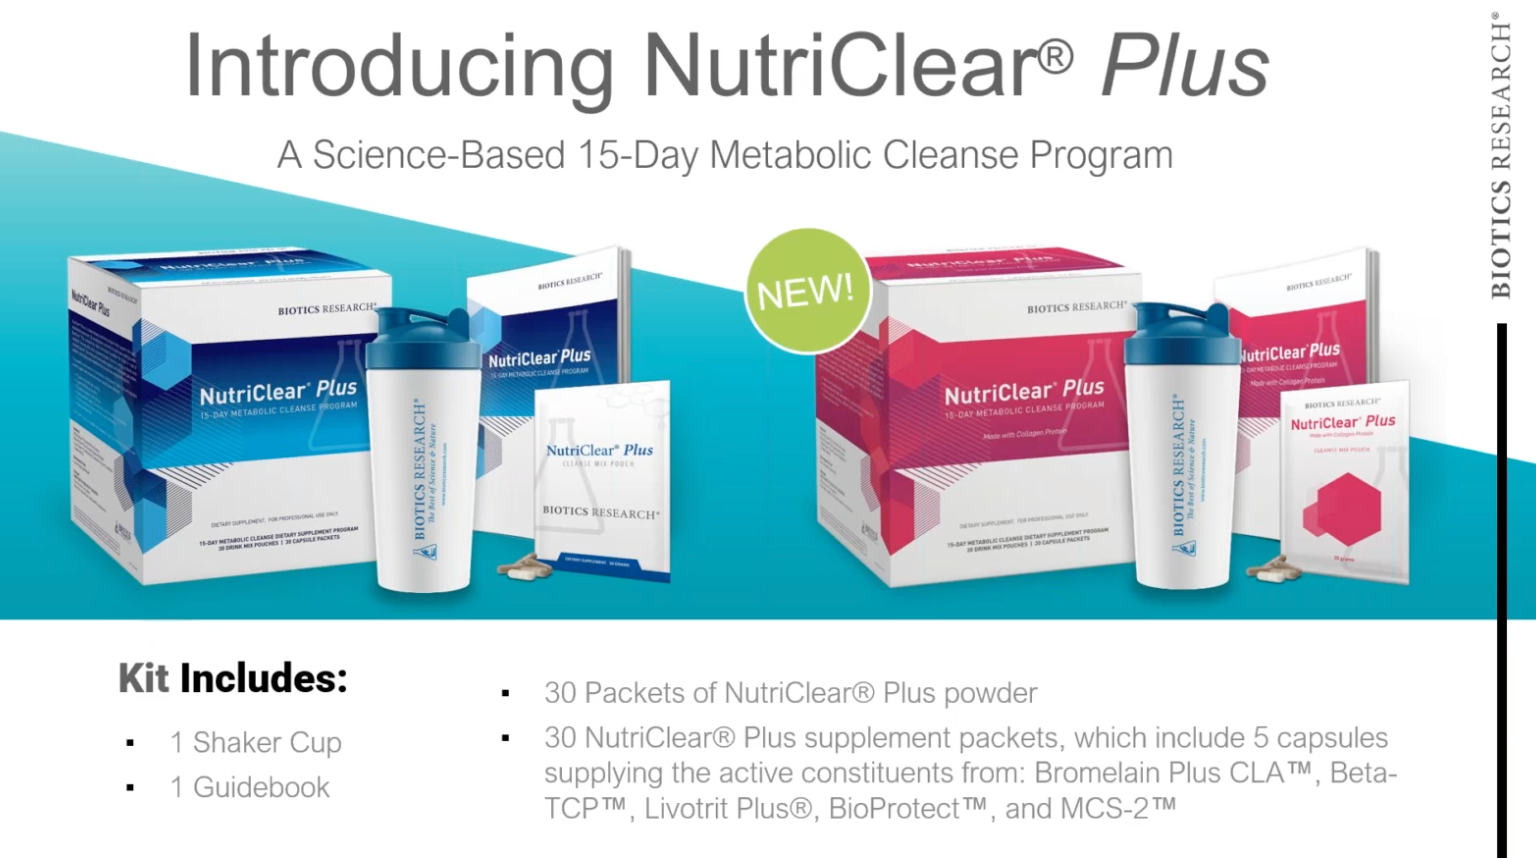 Biotics Research NUTRICLEAR PLUS KITS (Metabolic Cleanse & Weight Loss)-1